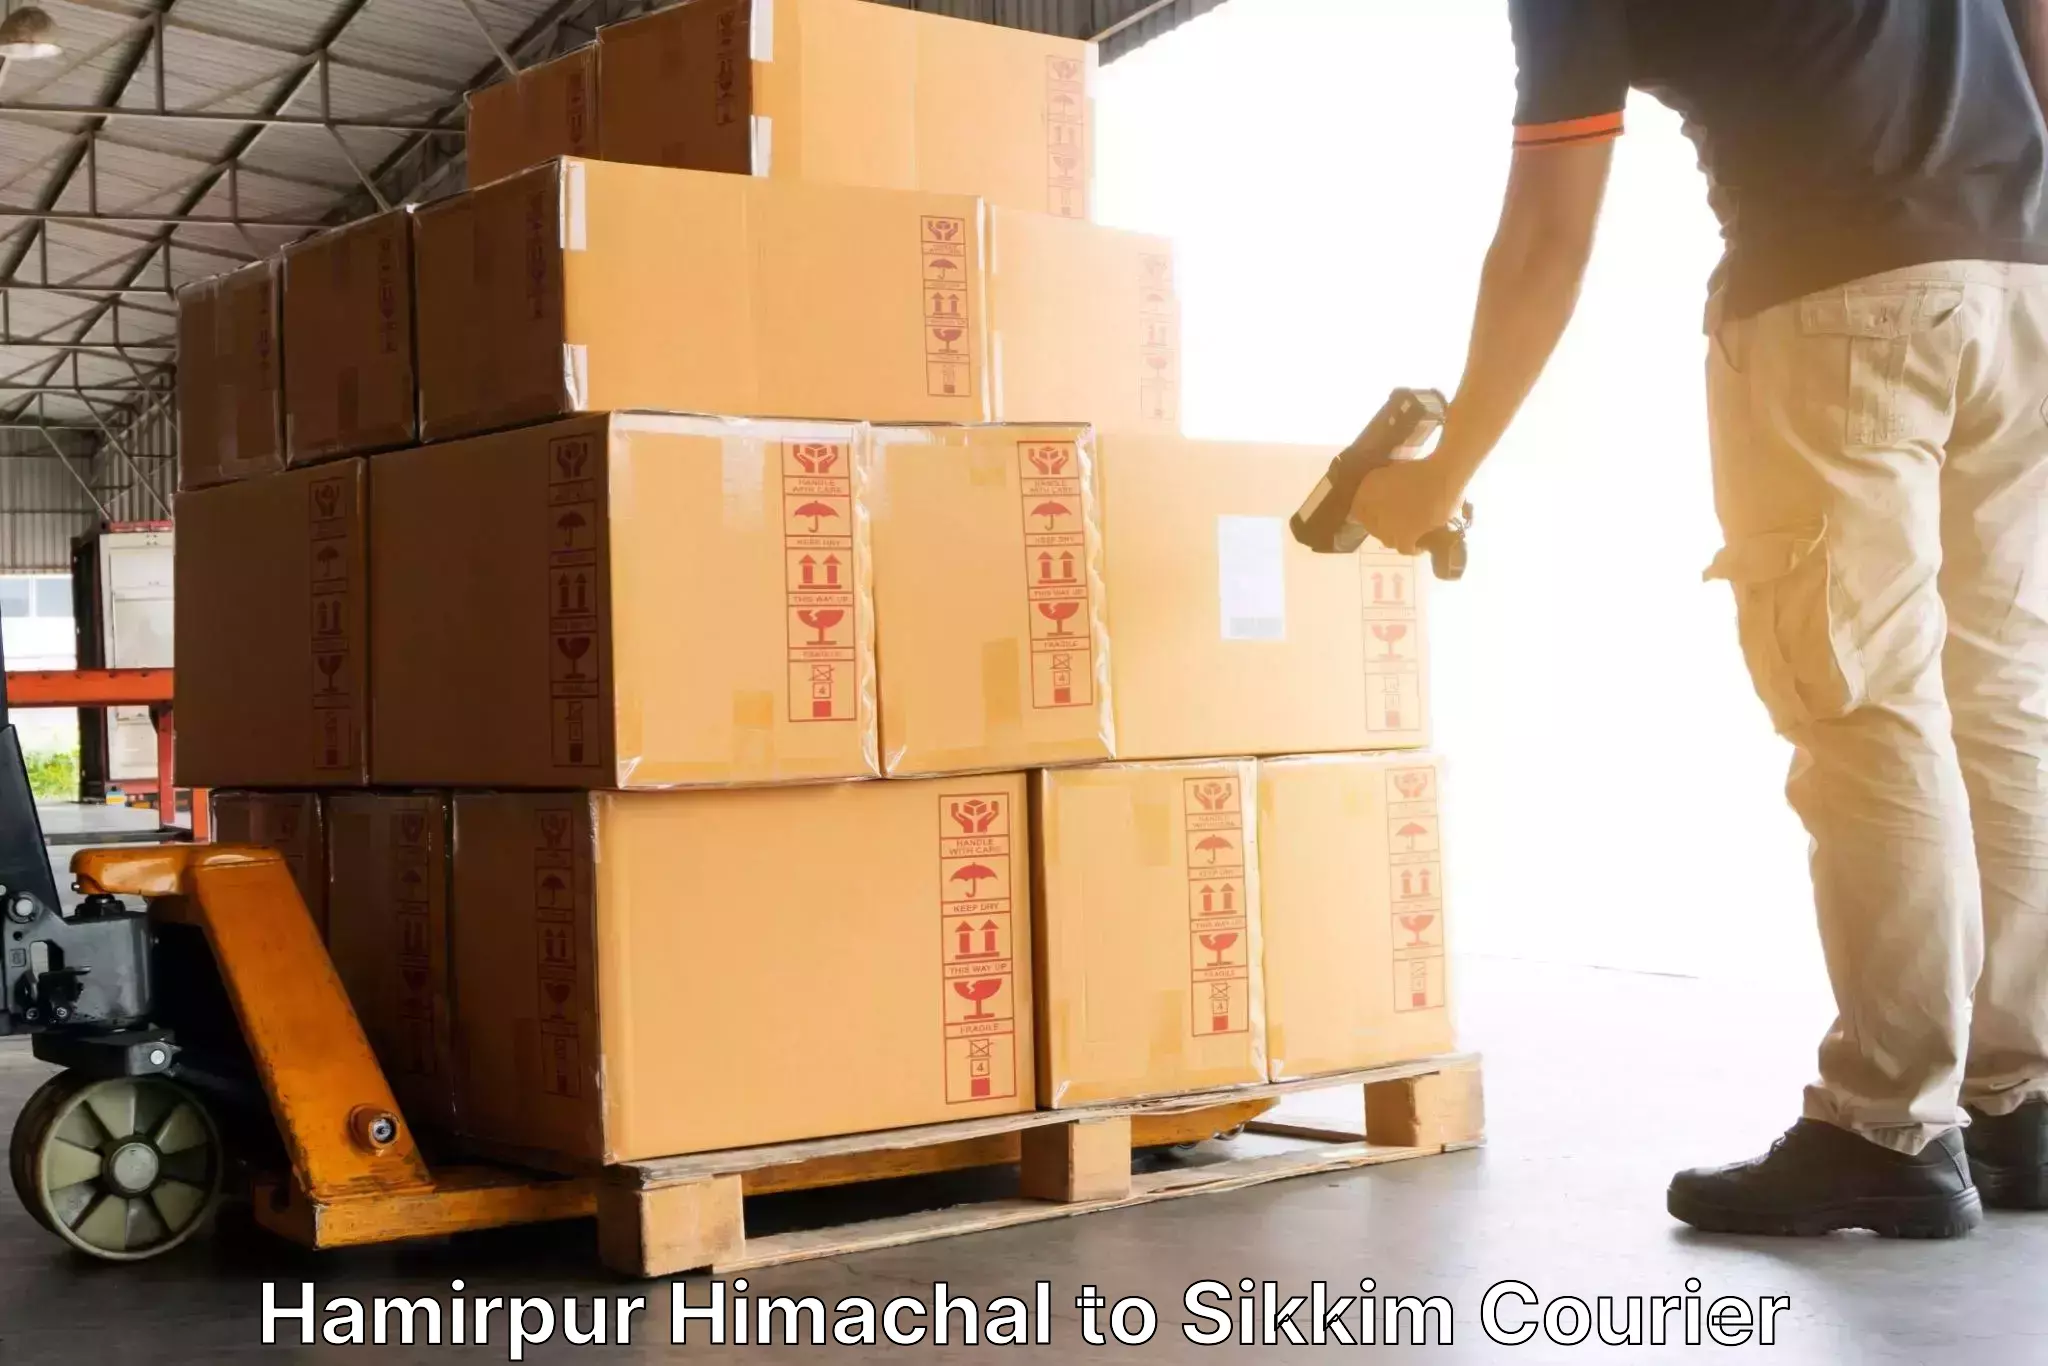 Shipping and handling Hamirpur Himachal to East Sikkim